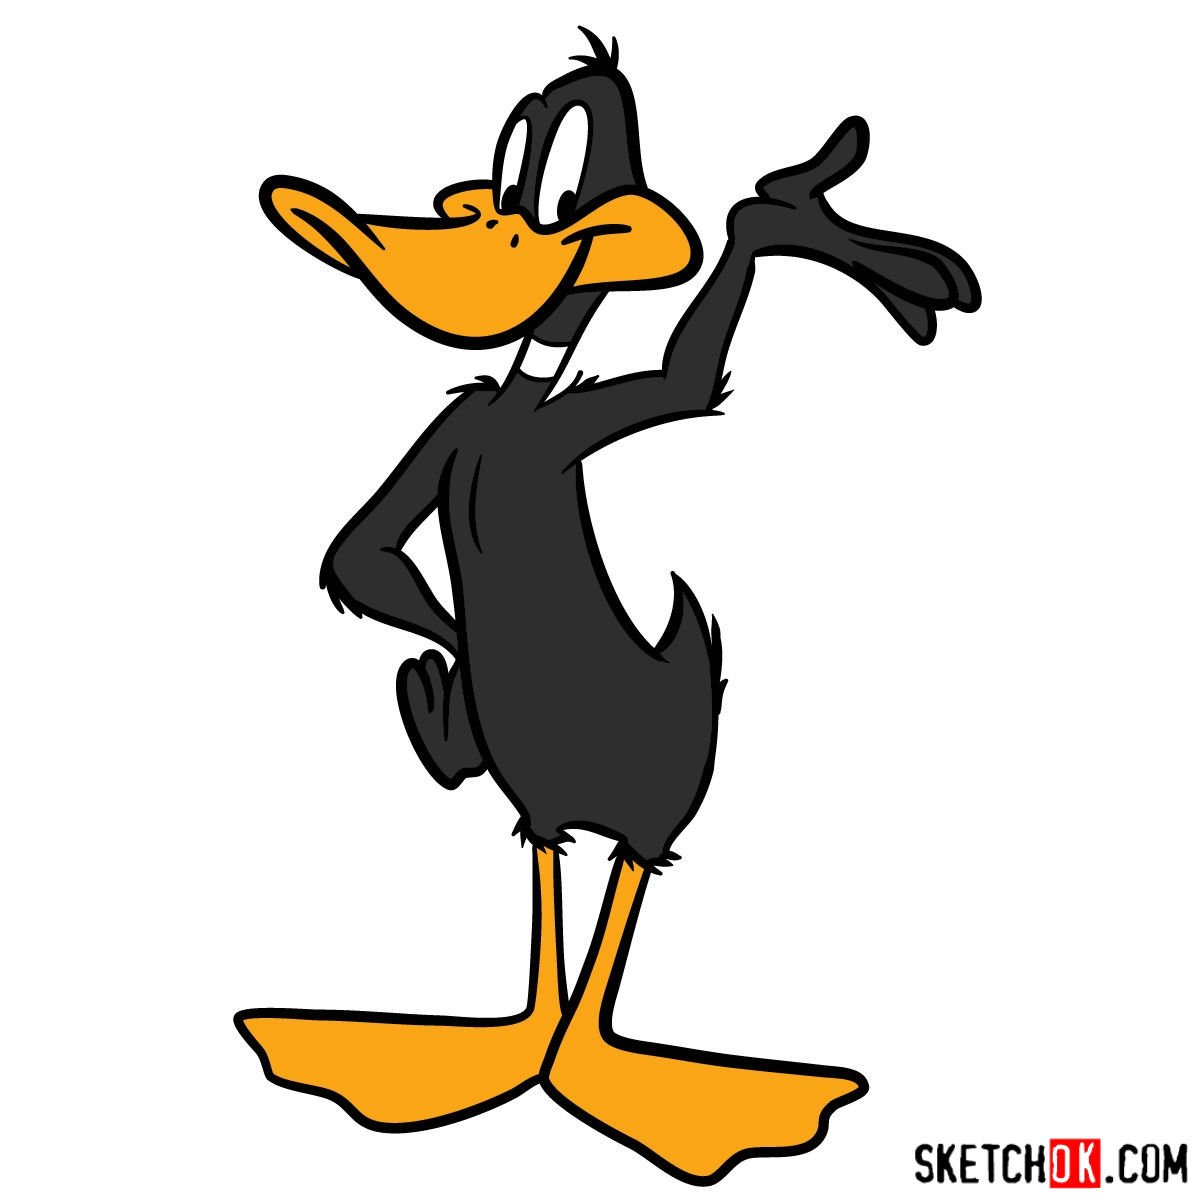 How to draw Daffy Duck